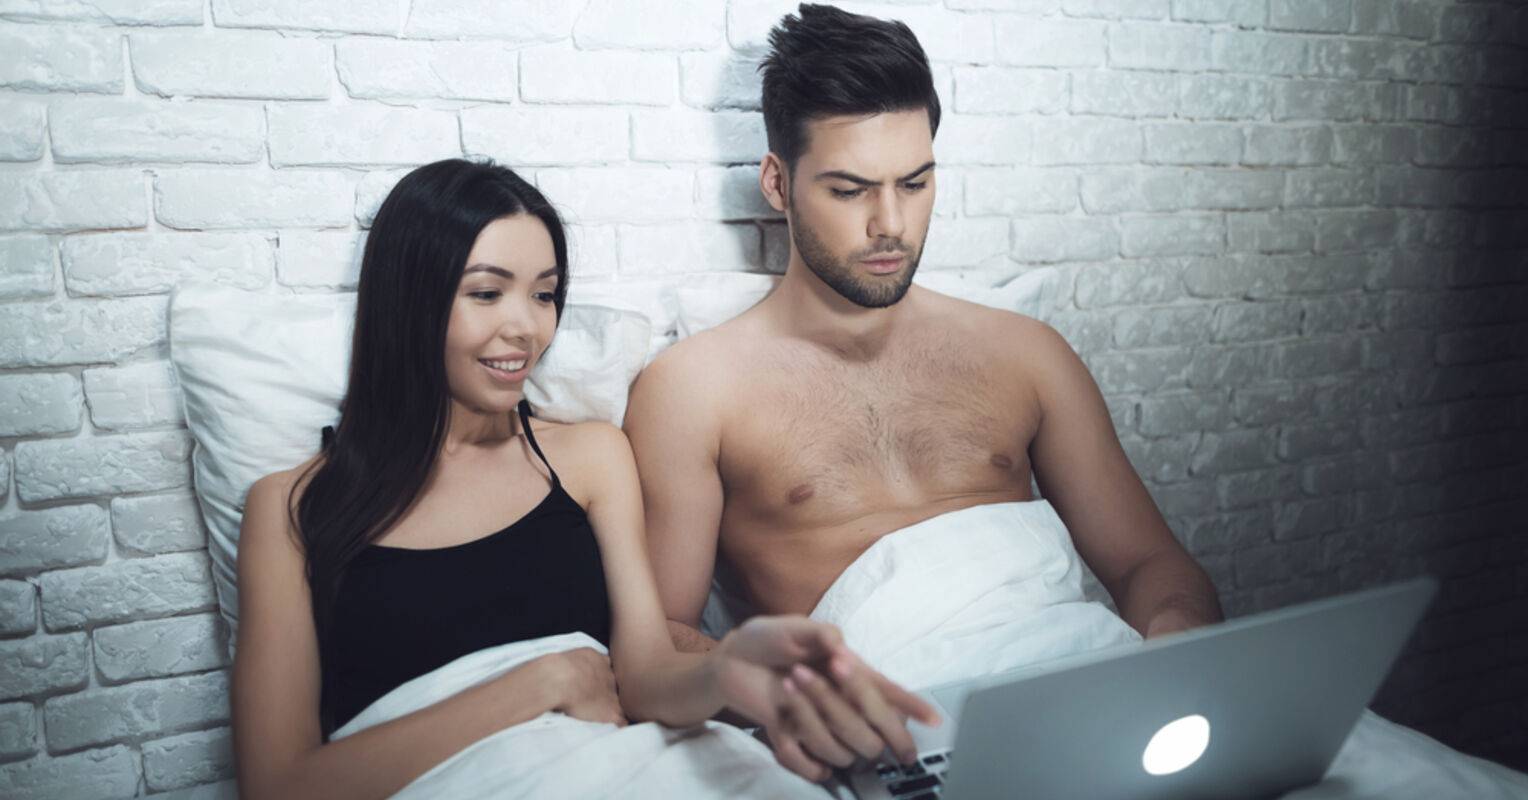 Is Watching Pornography a Form of Cheating? It Depends | Psychology Today